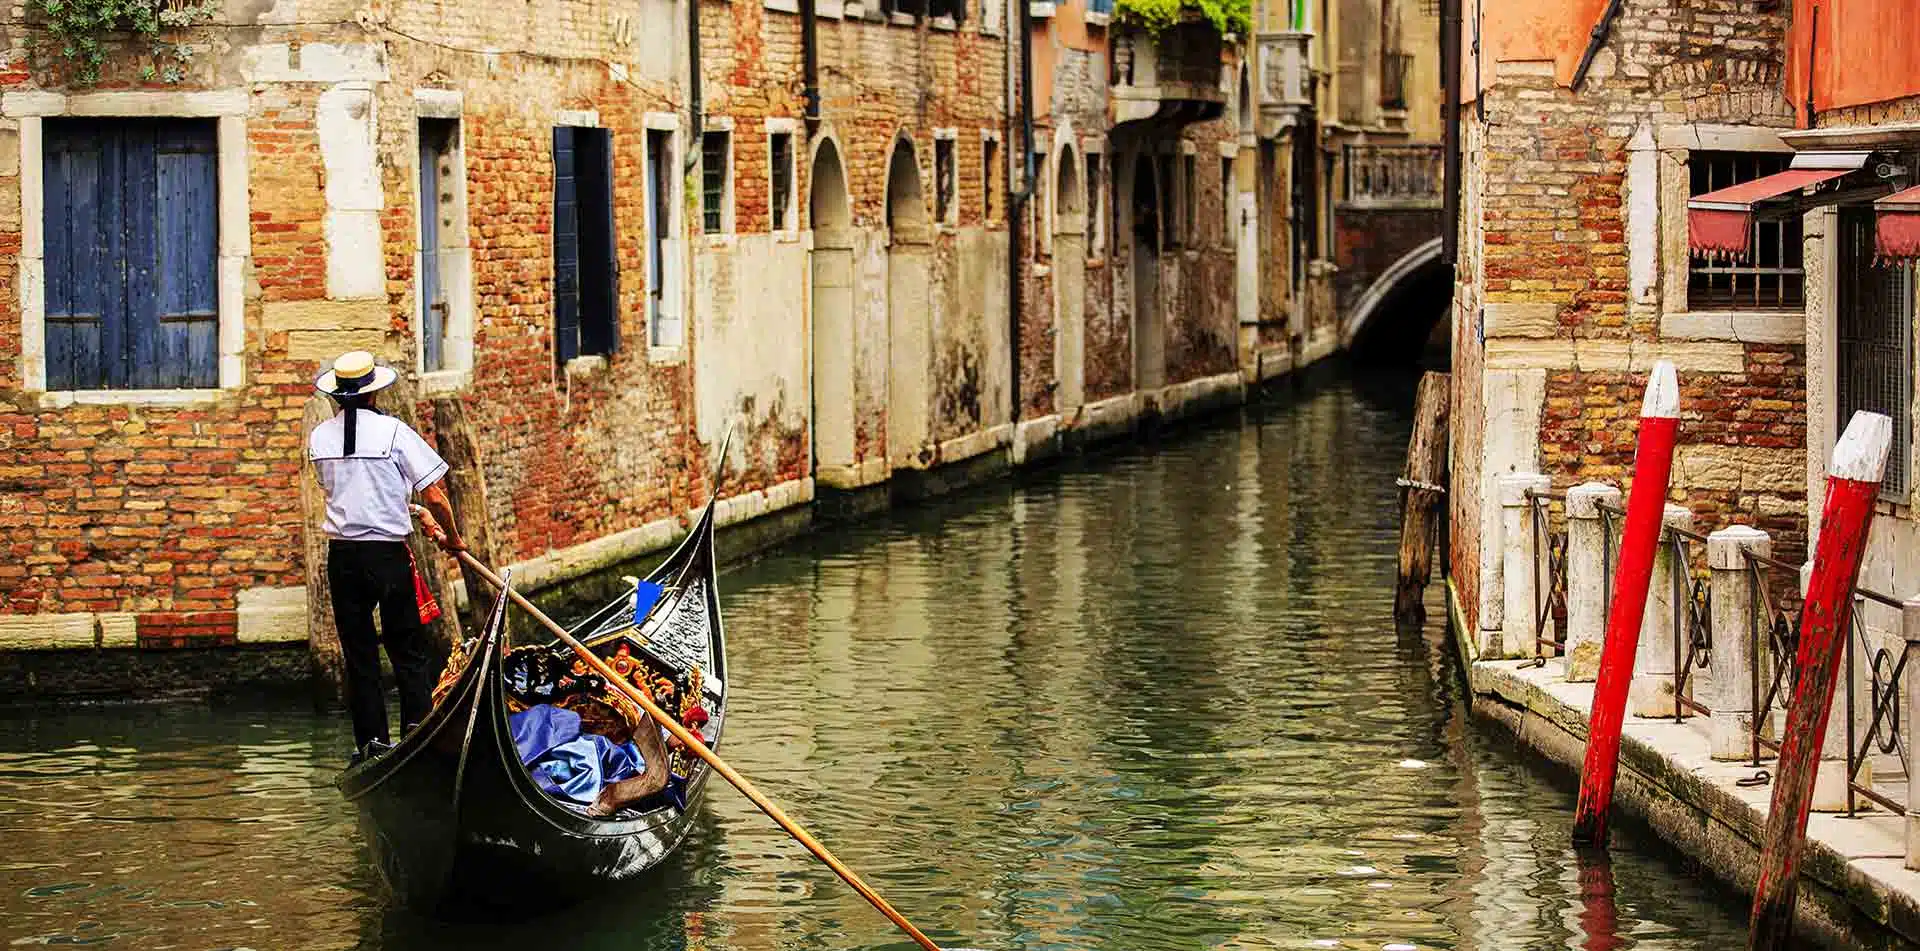 Man on Gondola in Canals of Venice, Italy